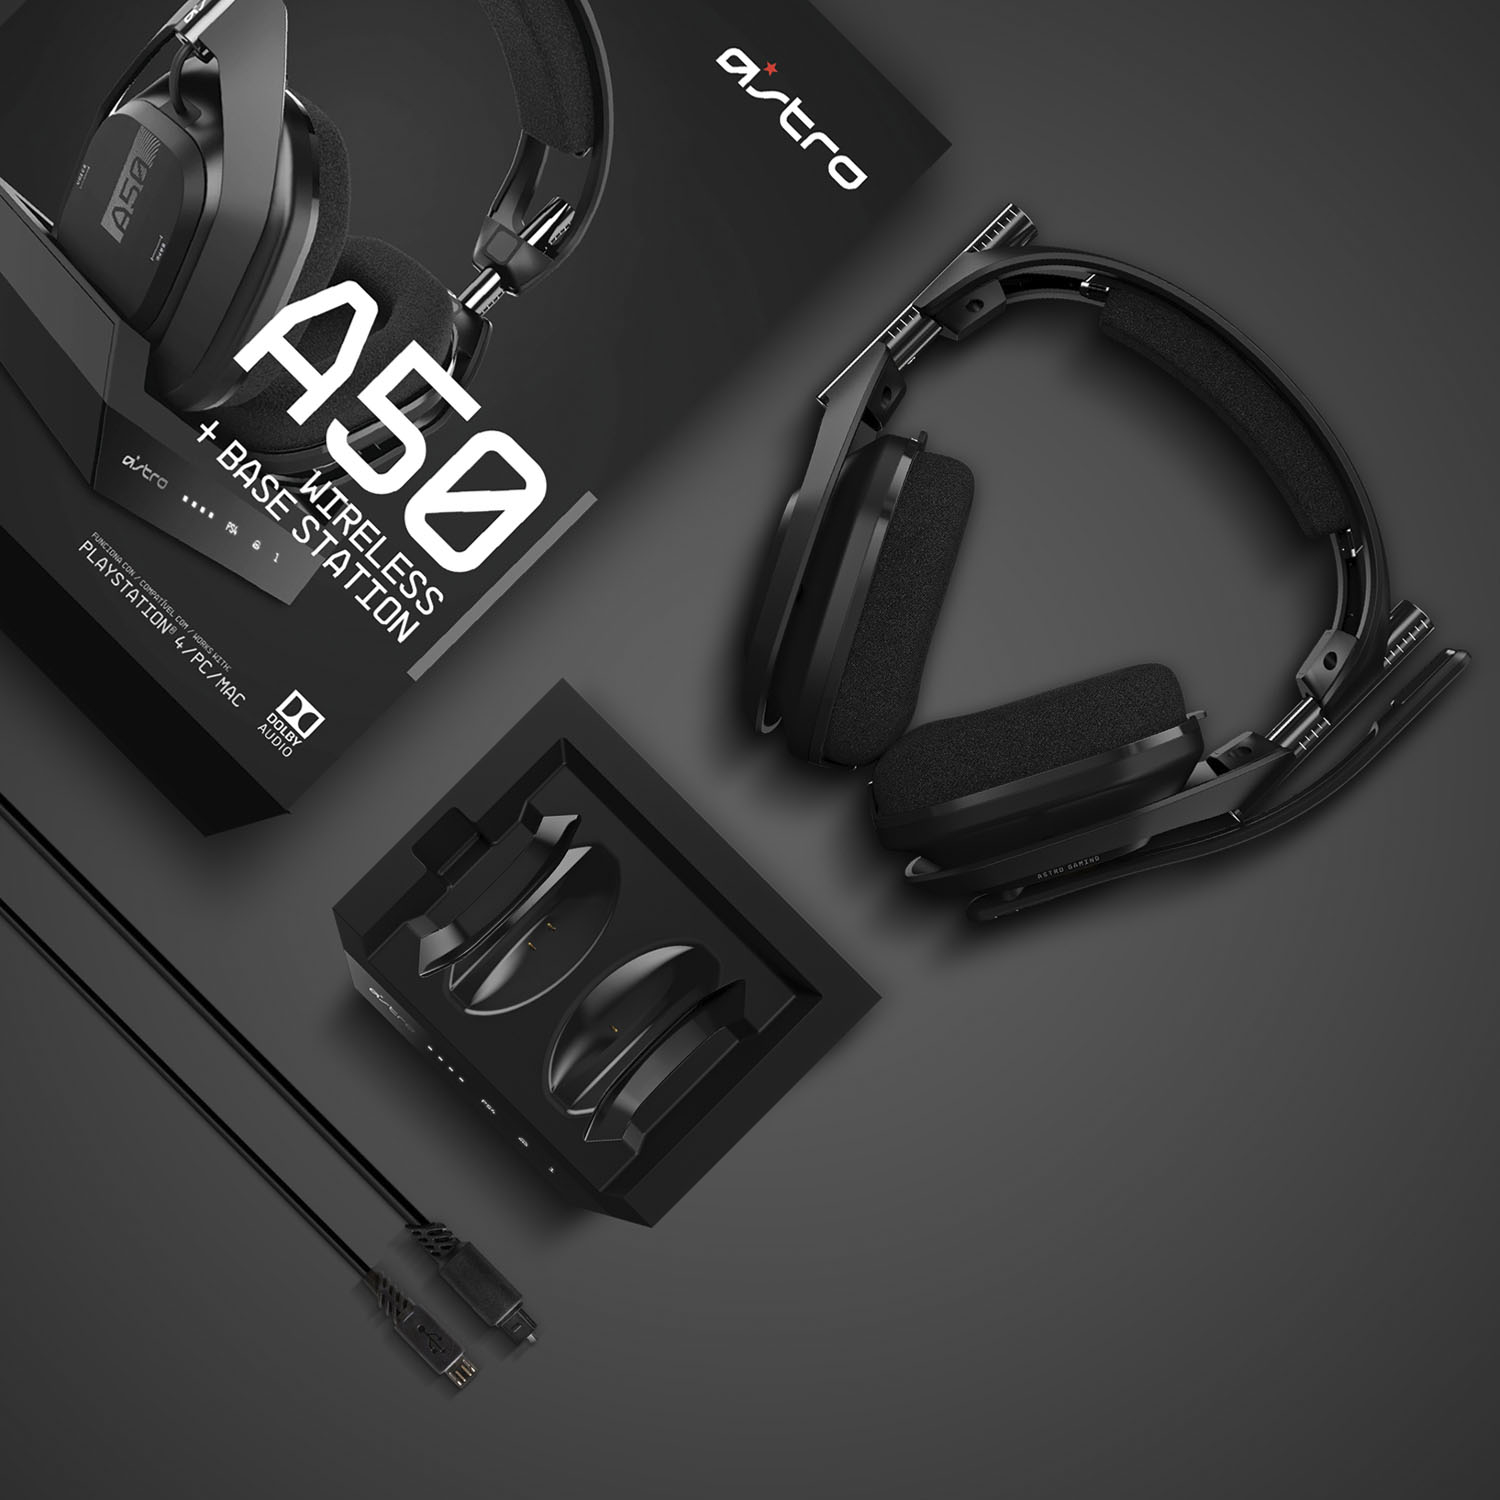 Specialiteit salaris Transplanteren A50 Wireless Astro Gaming Headset with Base Station in Black for  PlayStation 4 iuu.org.tr